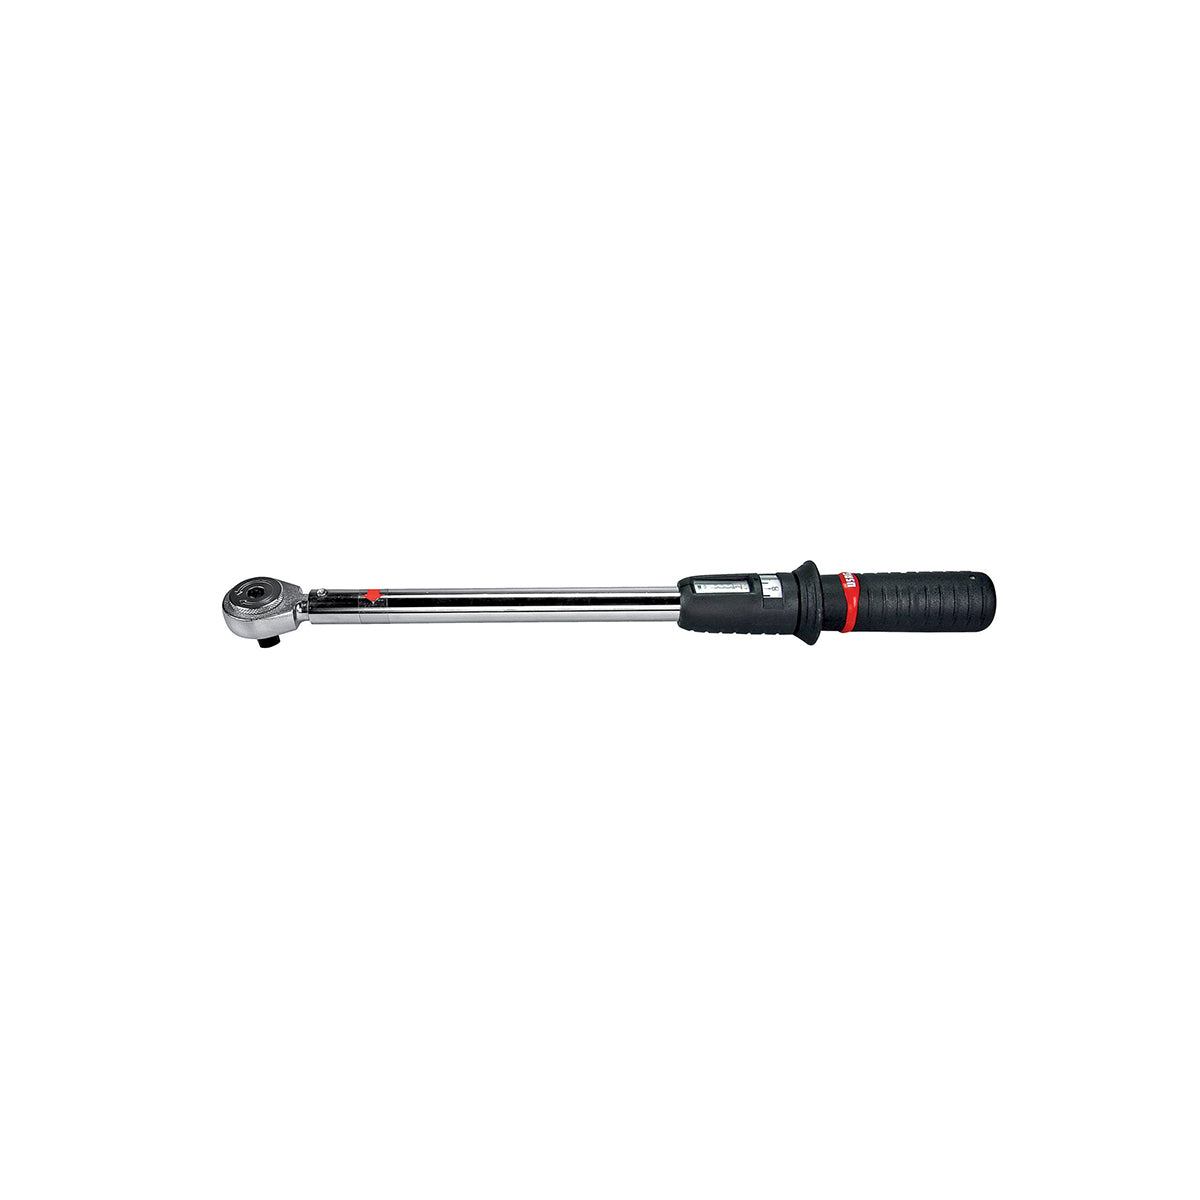 Dynamometric wrench with reversible ratchet 1/2" Nm:40÷200 - Usag 810 N